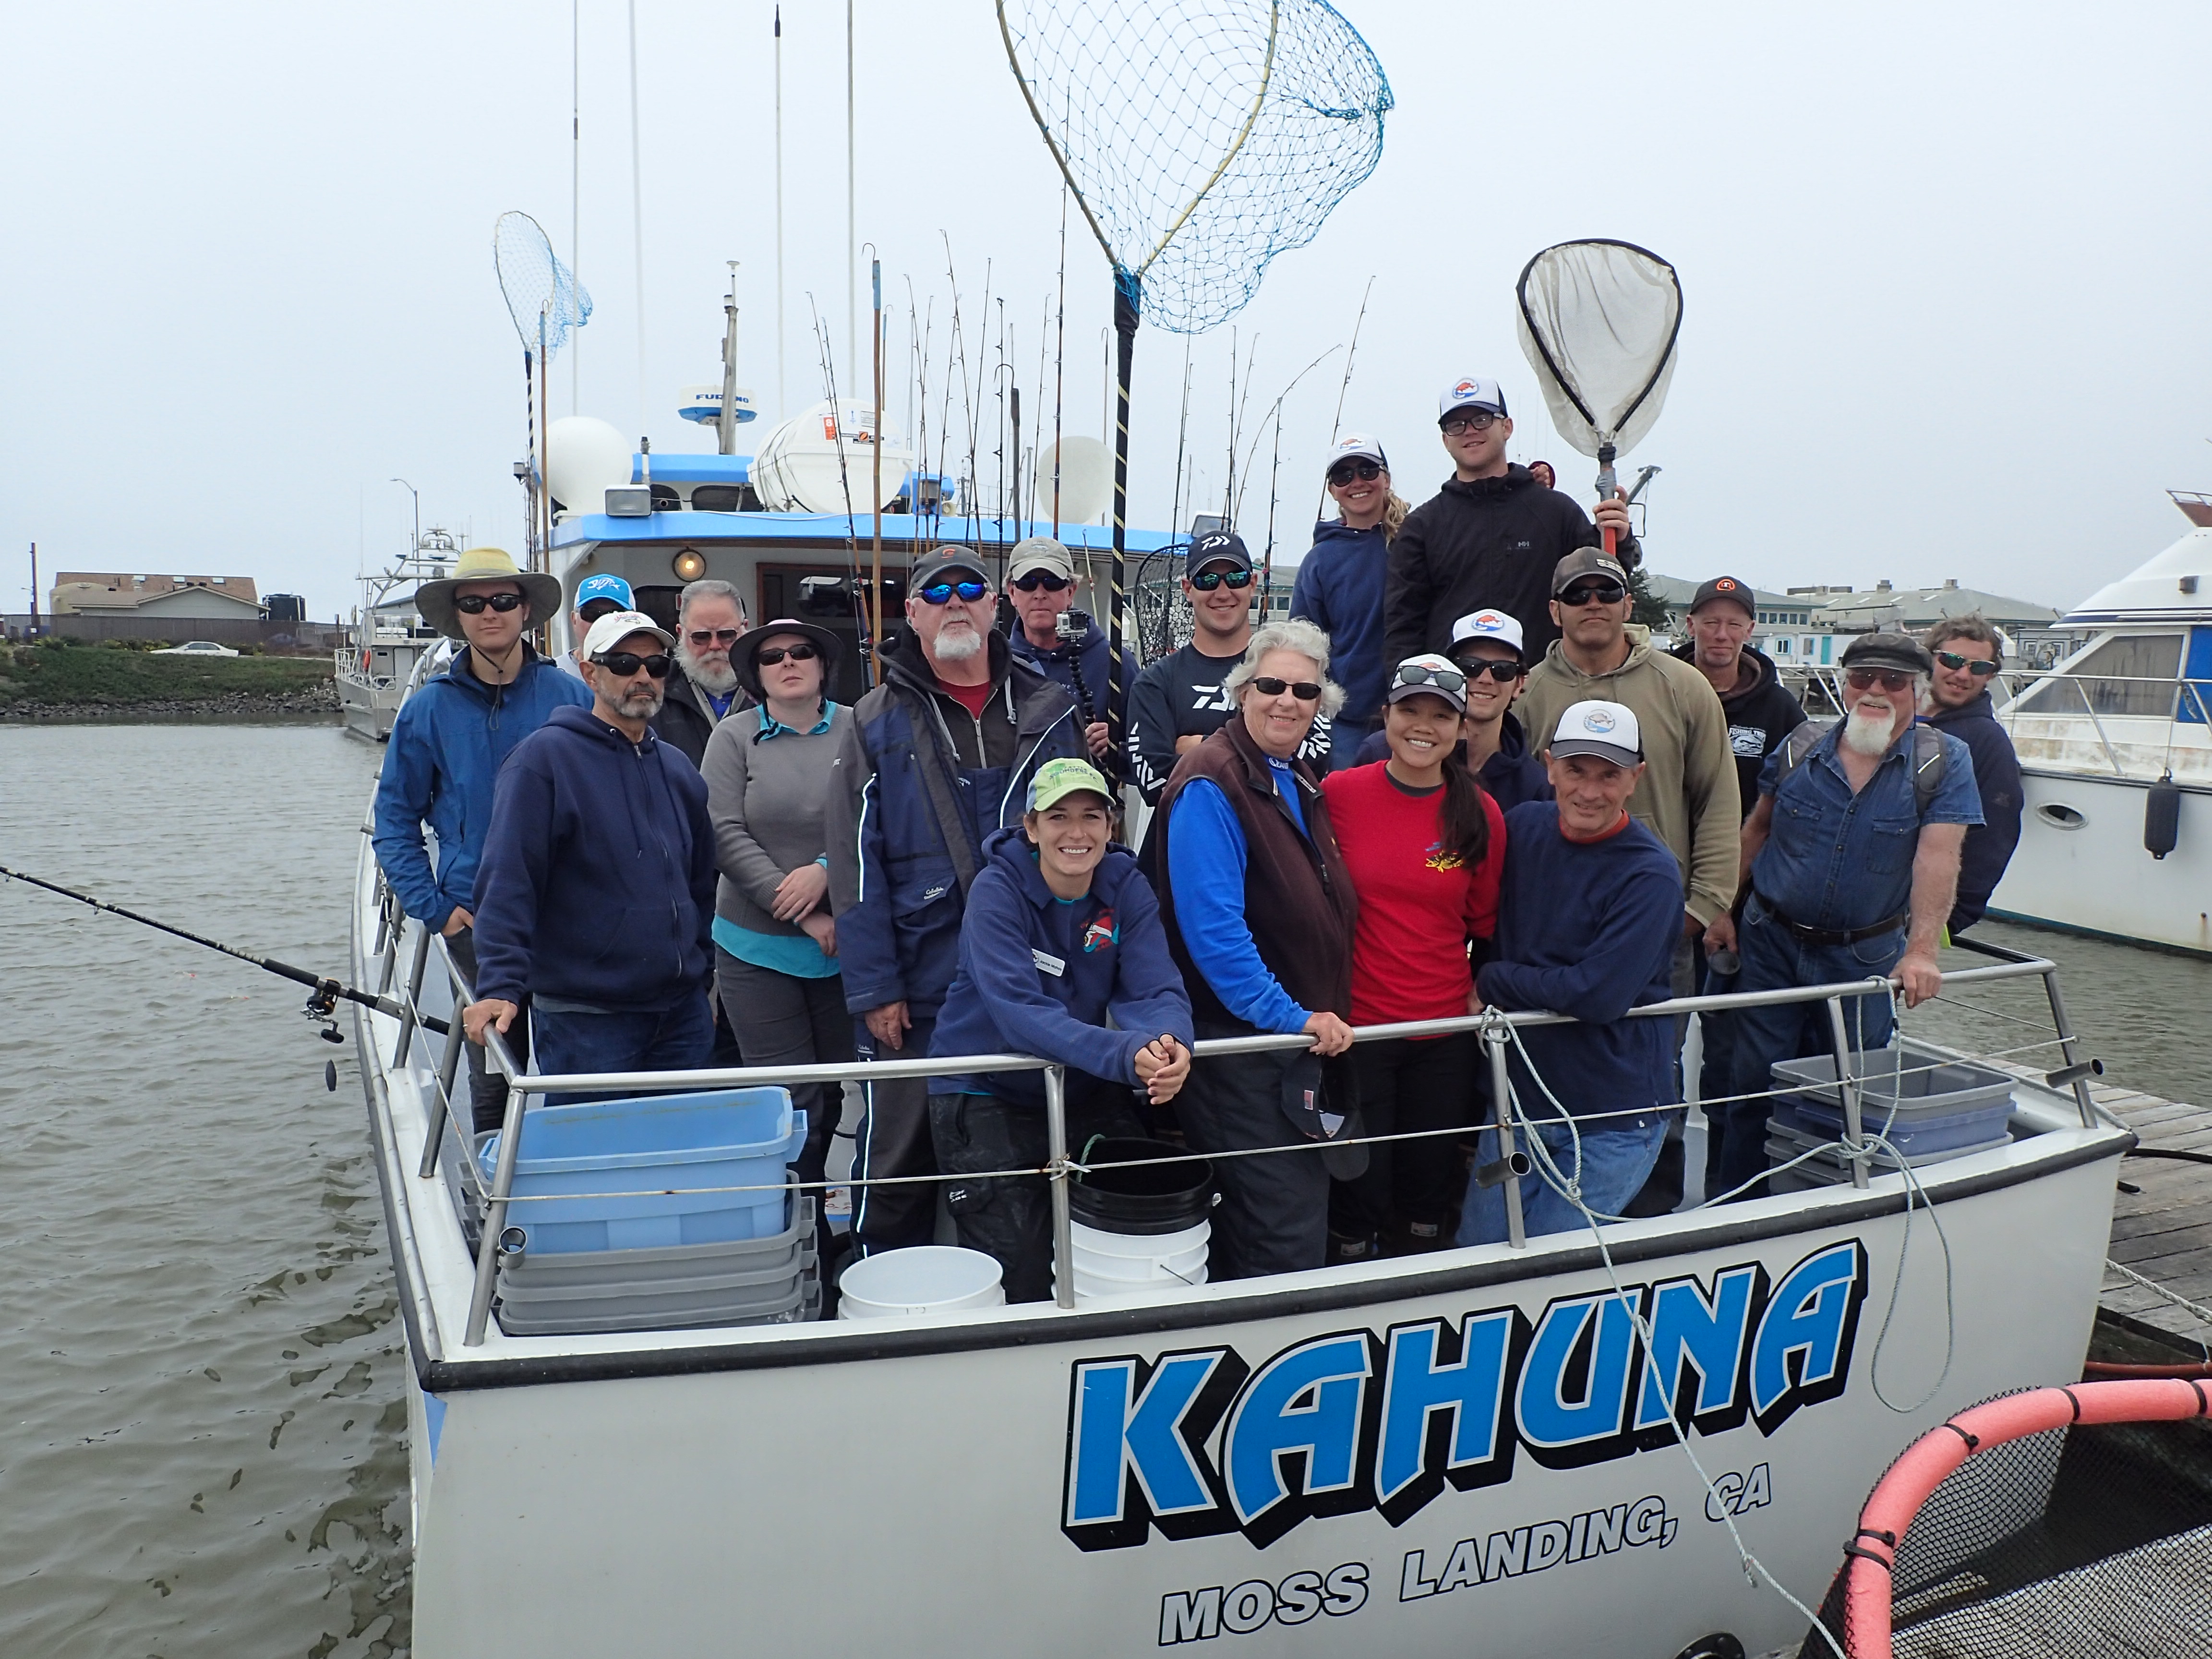 A group of community members joins the CCFRP scientists aboard the fishing boat Kahuna for a day on the Monterey Bay.